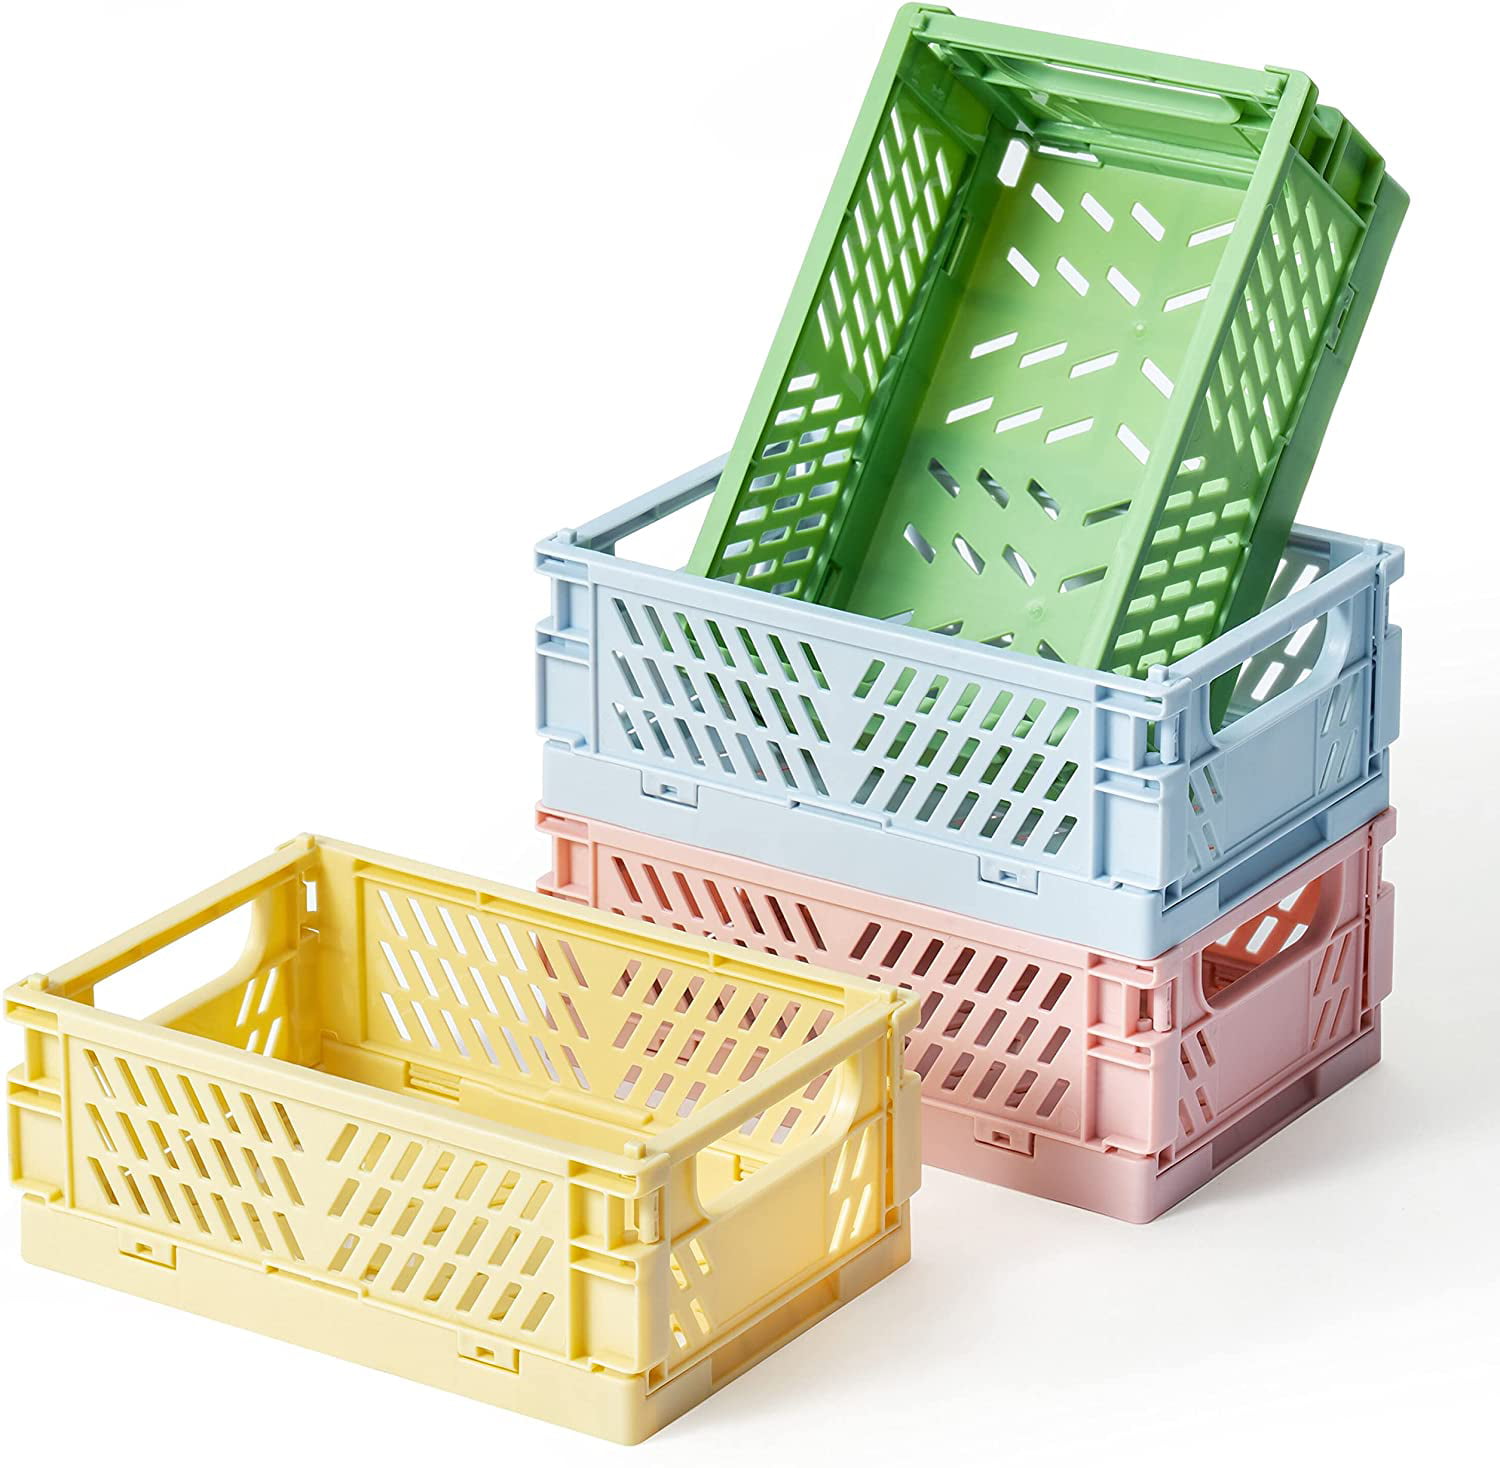 LARGE Pastel Color Plastic Storage Crate Set of 3 Foldable Stackable Storage  and Organization Stationary Kids Storage Holiday Gift 